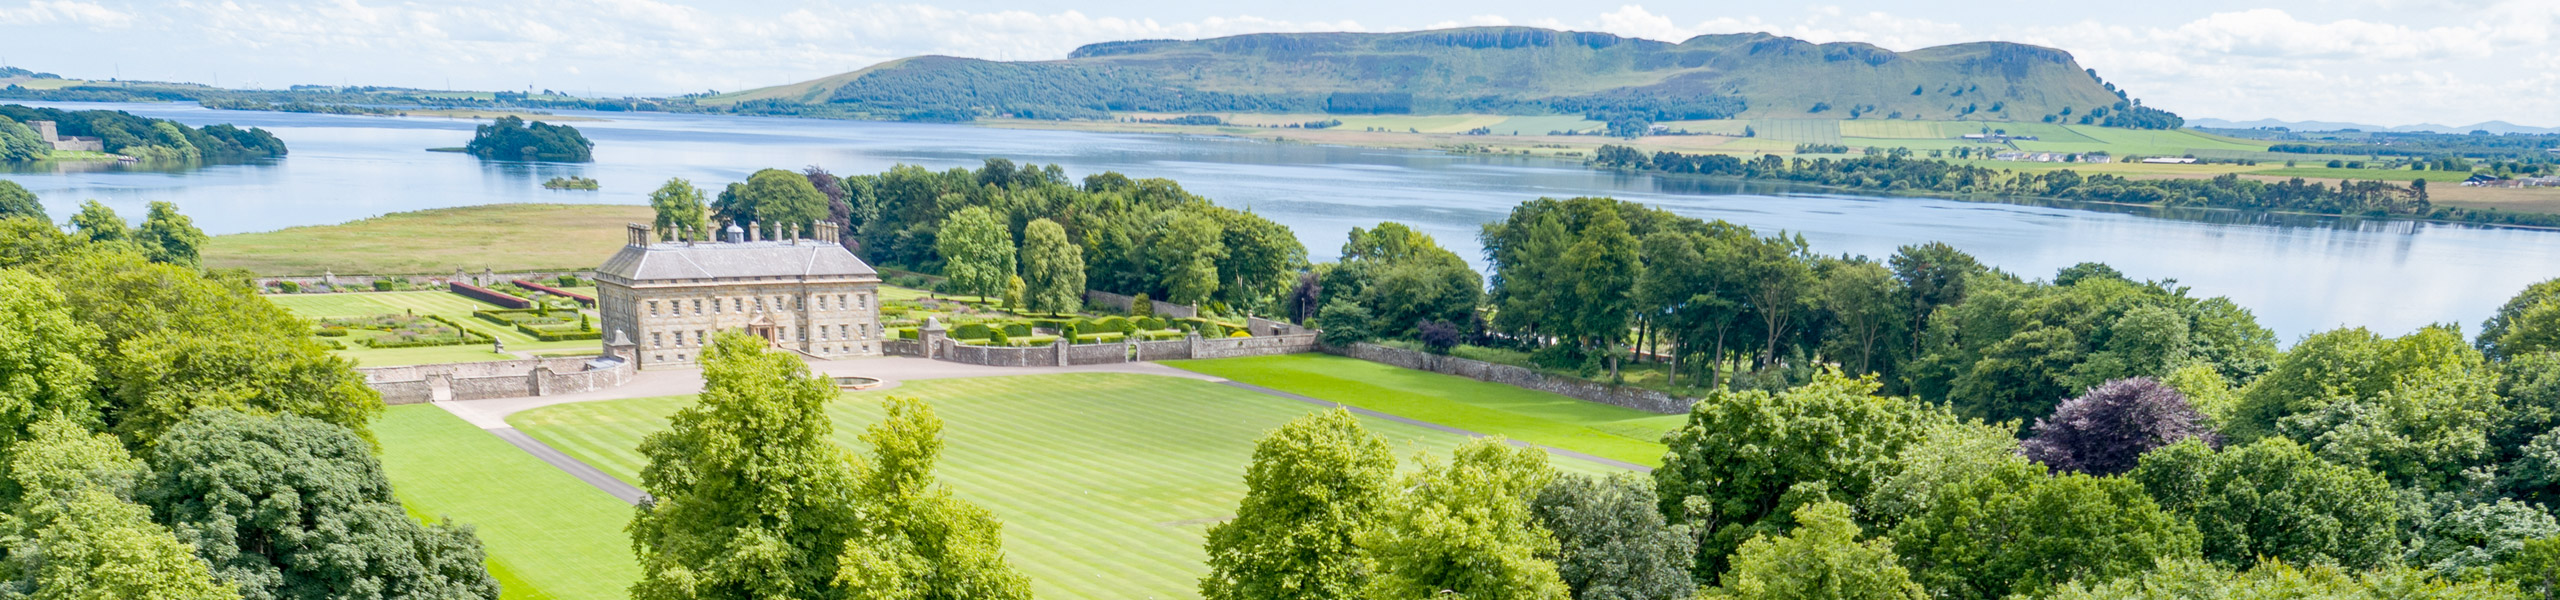 Landscape of Kinross House with Loch Leven behind